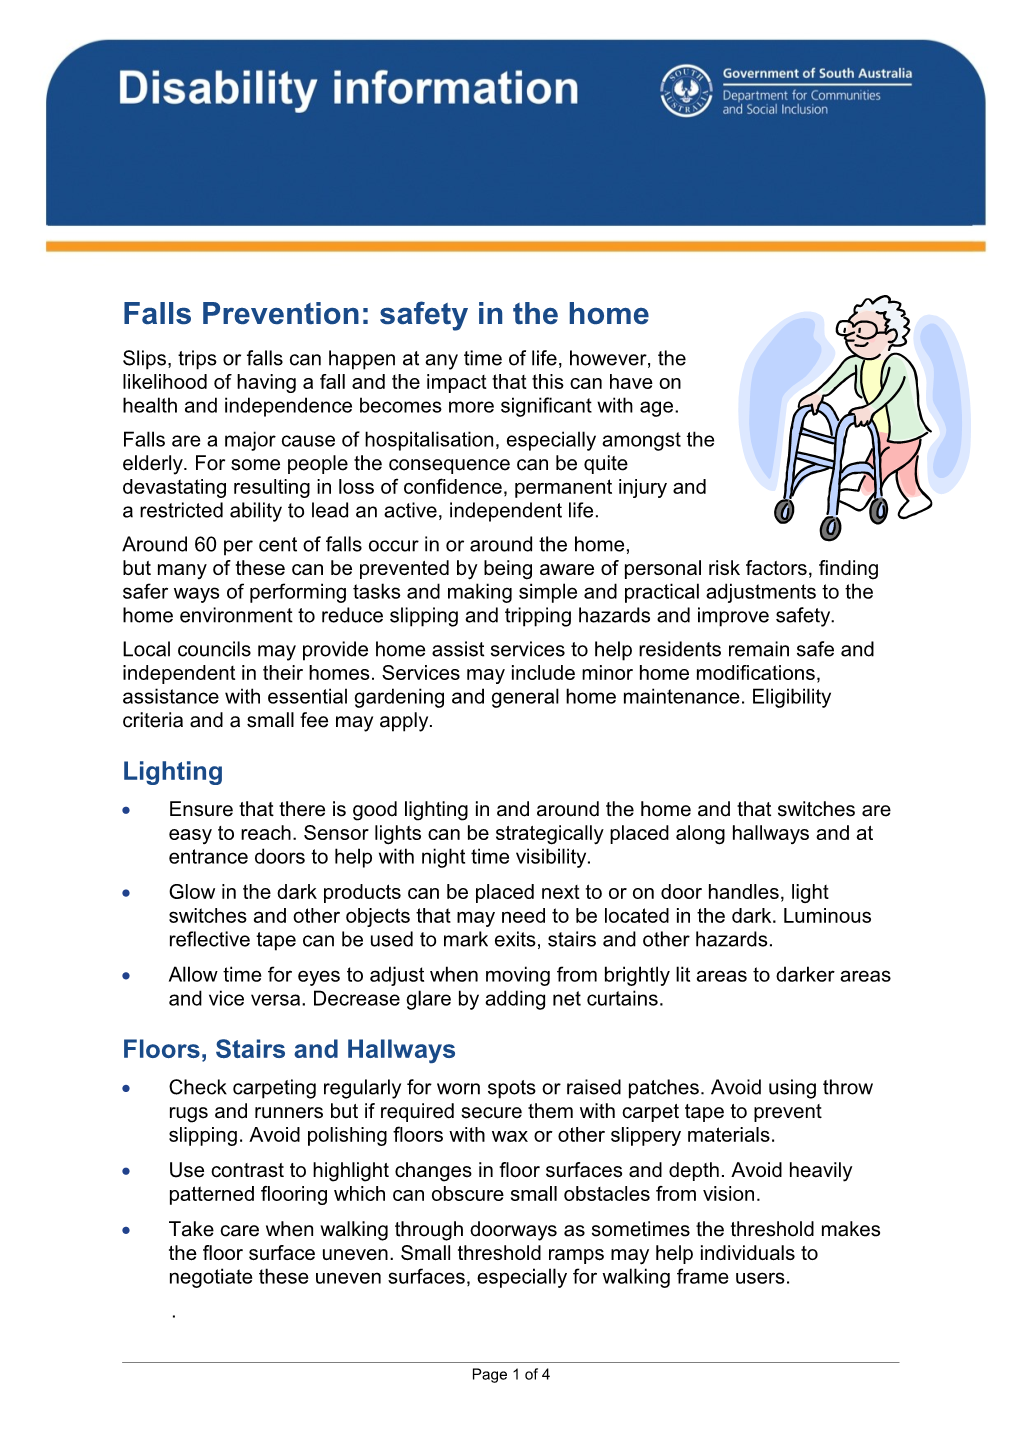 Falls Prevention: Safety In The Home